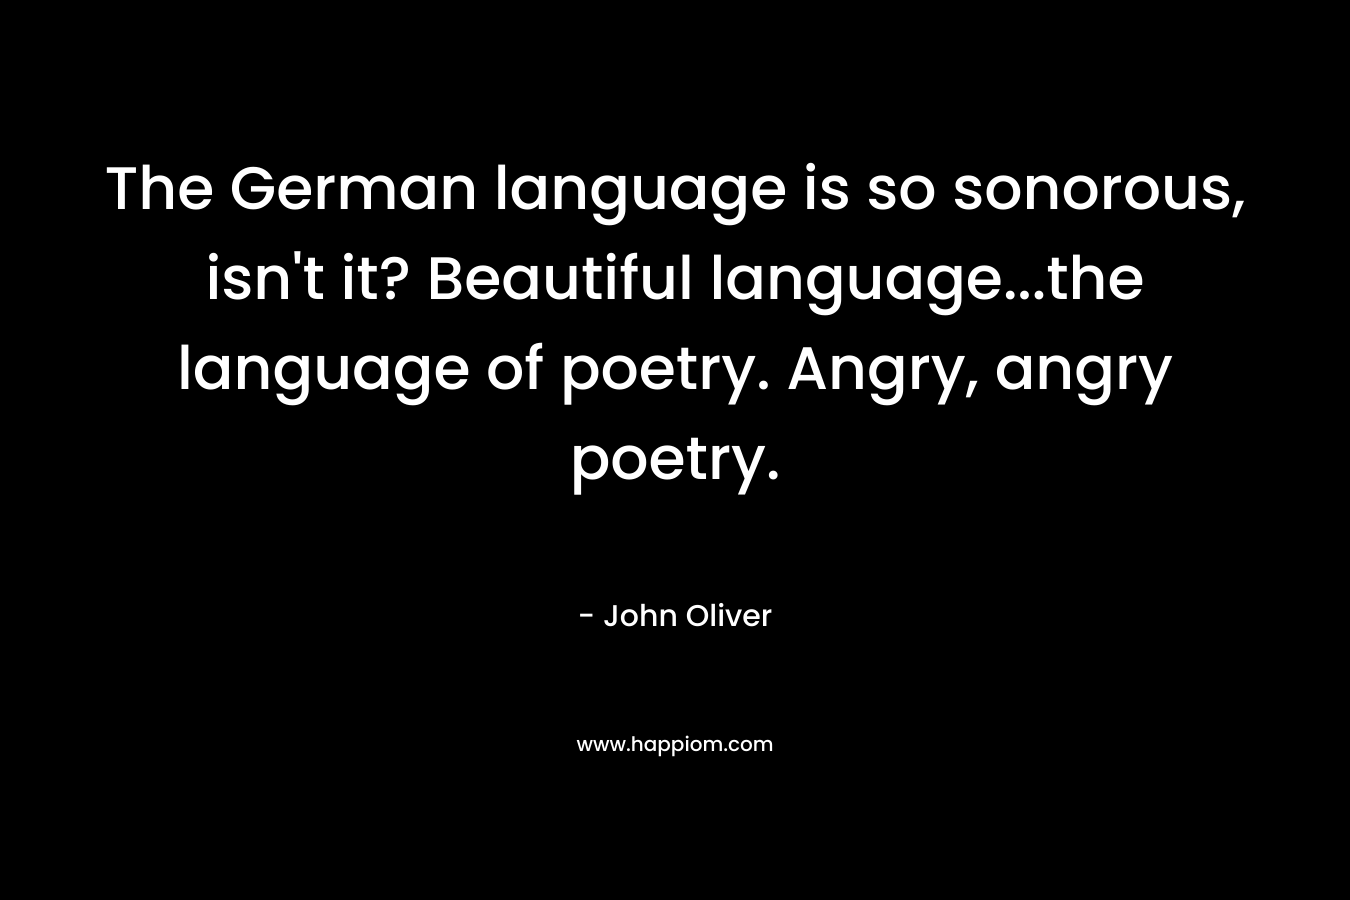 The German language is so sonorous, isn't it? Beautiful language...the language of poetry. Angry, angry poetry.